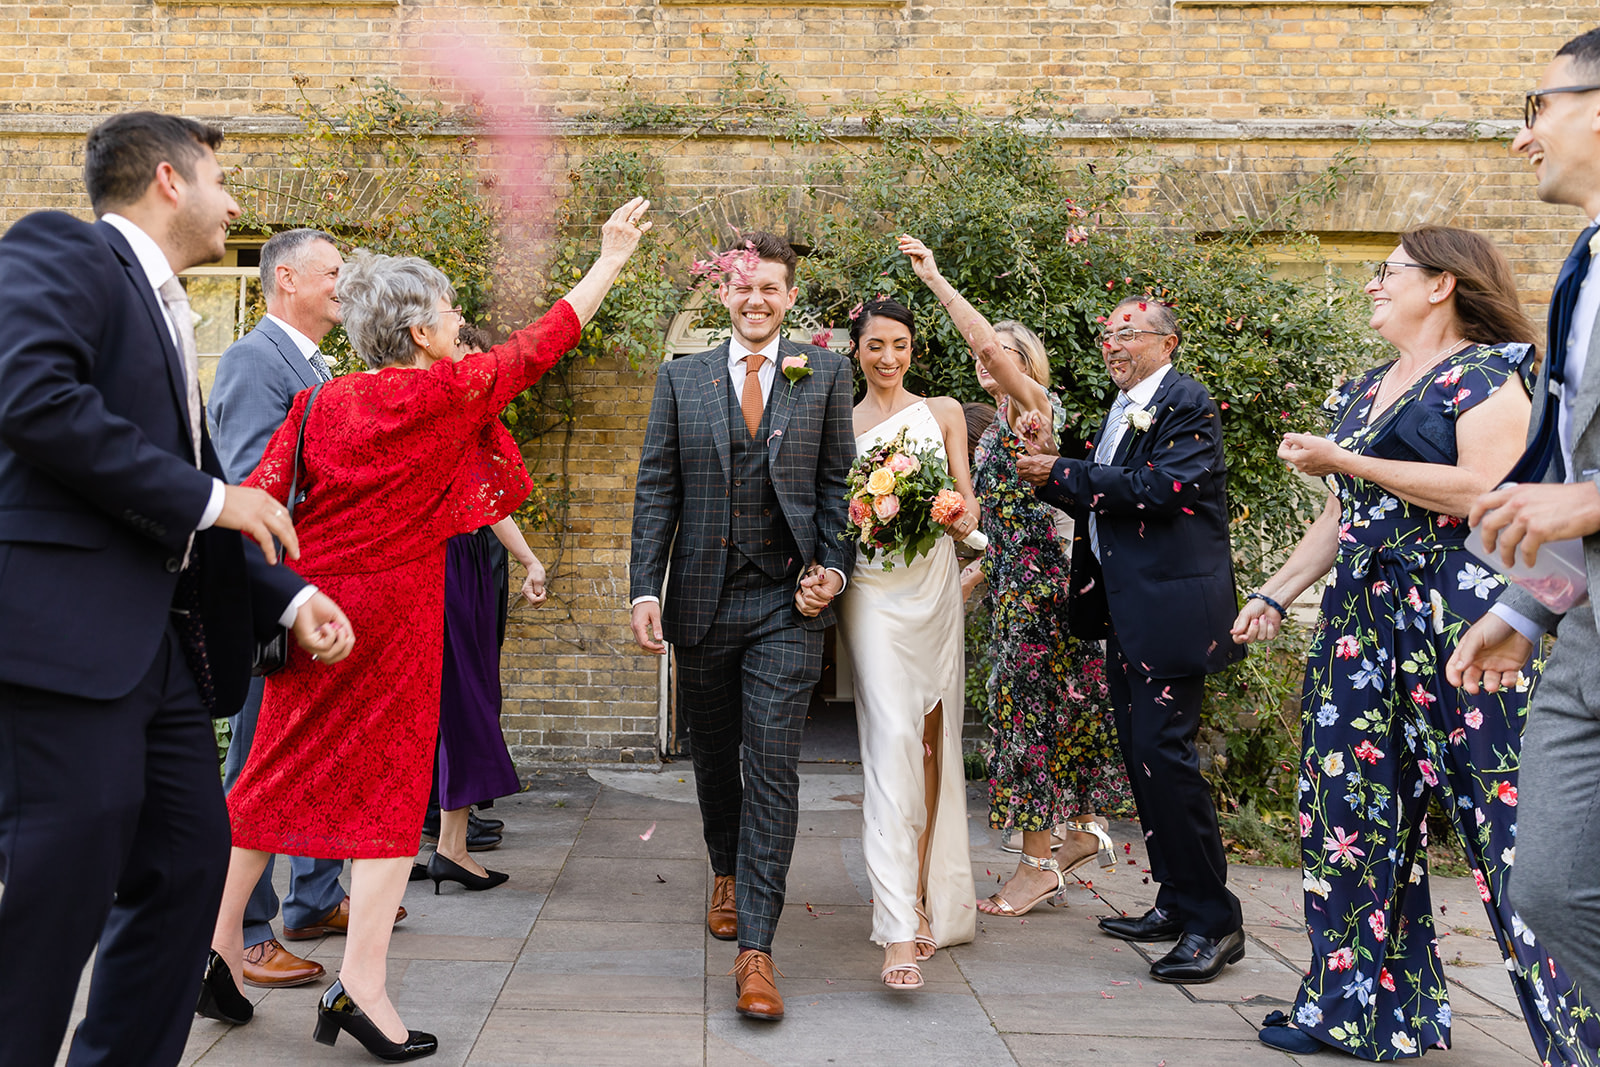 bride and groom welcomed by guest with confetti